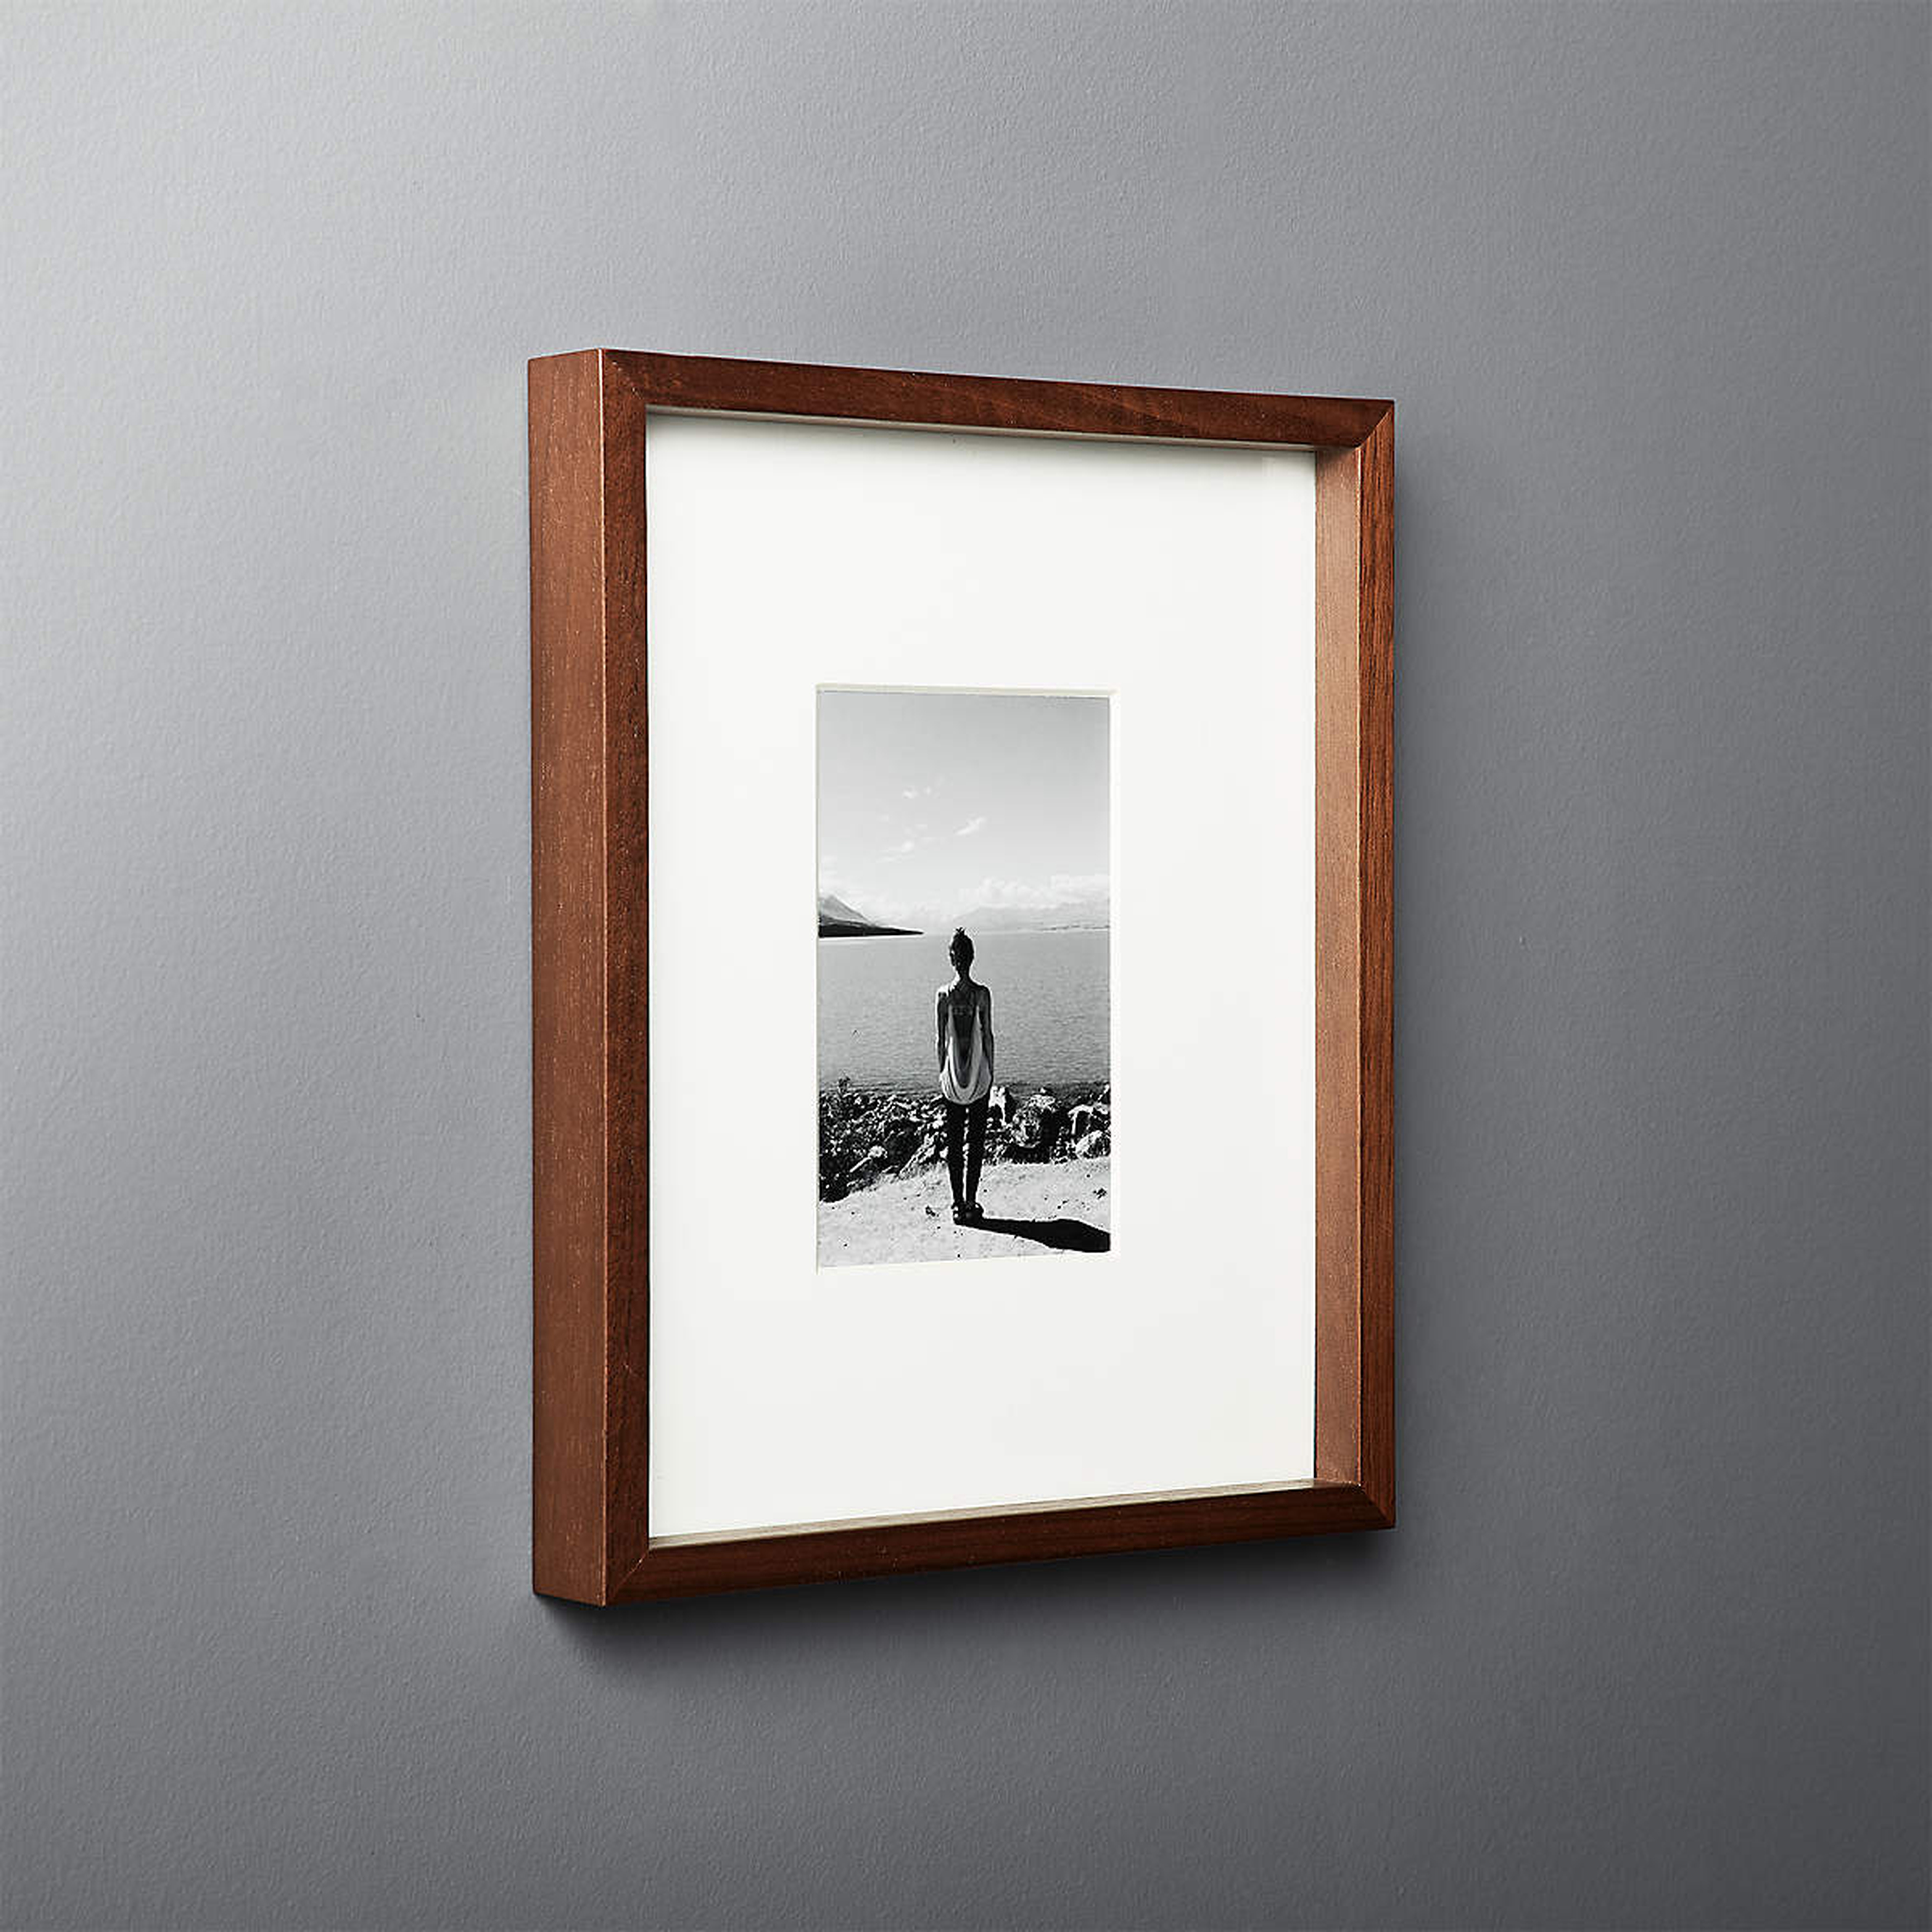 Gallery Walnut Picture Frame with White Mat 4" x 6" - CB2